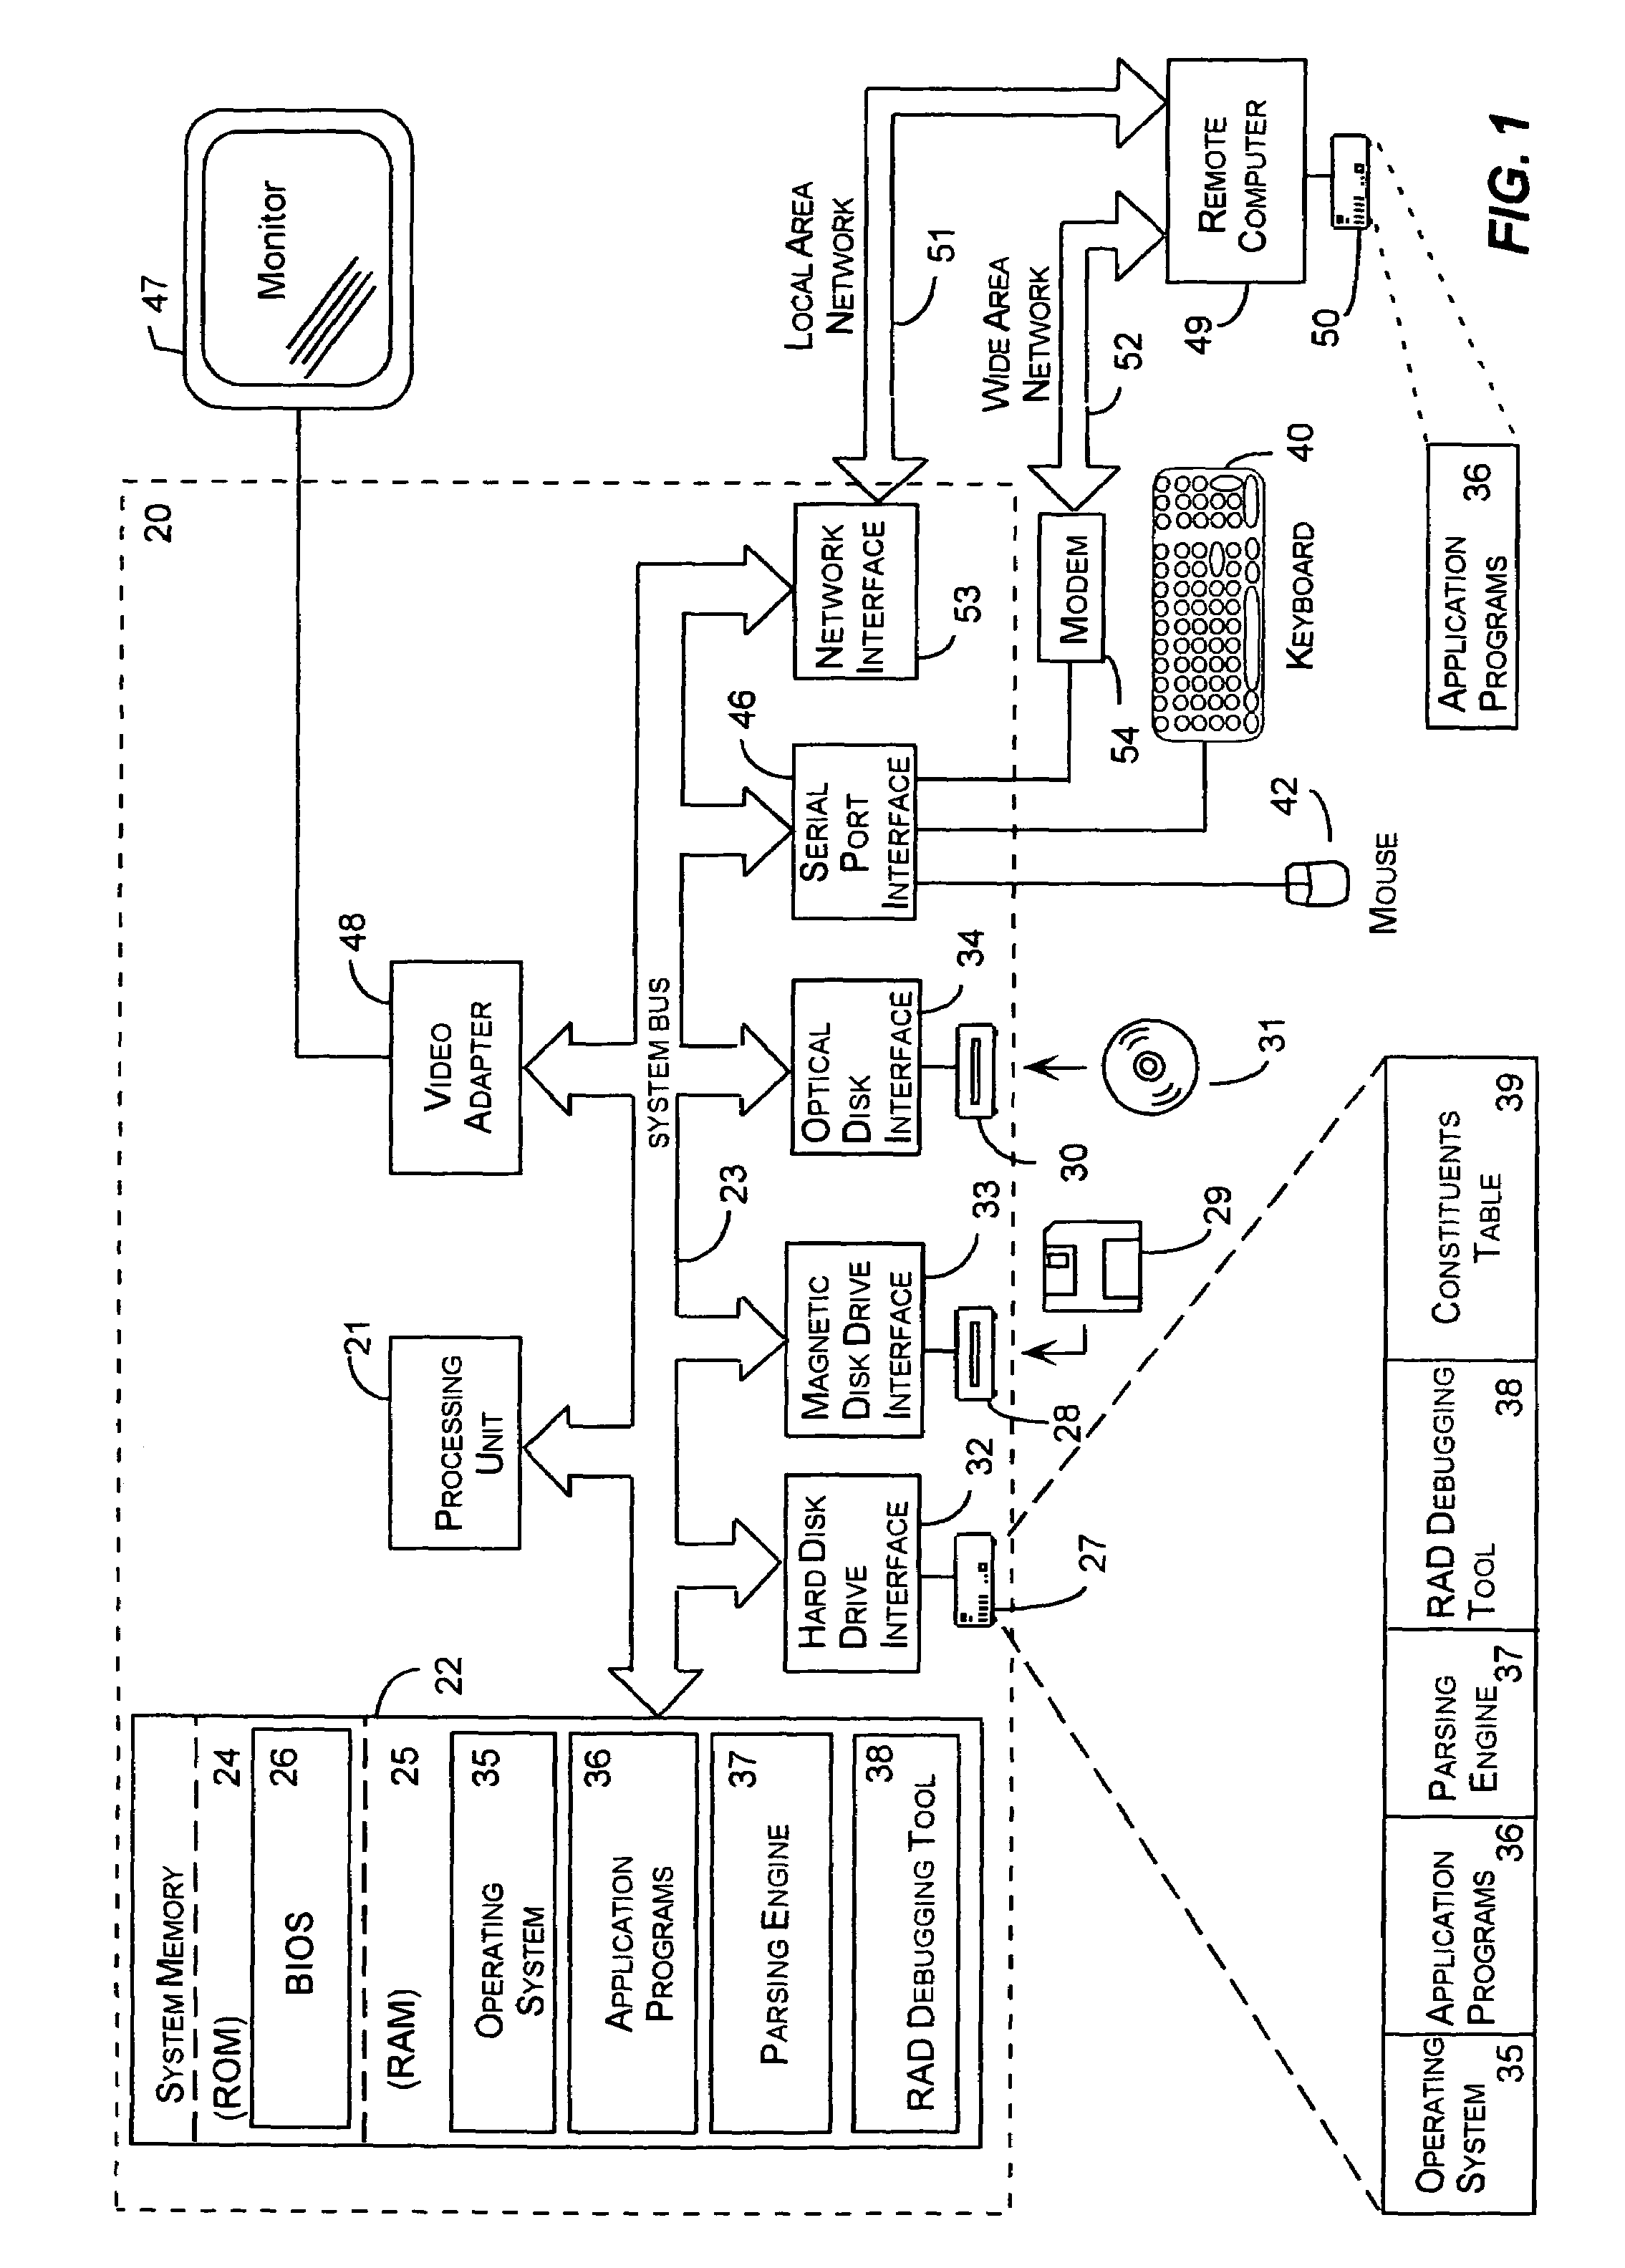 Method and apparatus for analyzing and debugging natural language parses